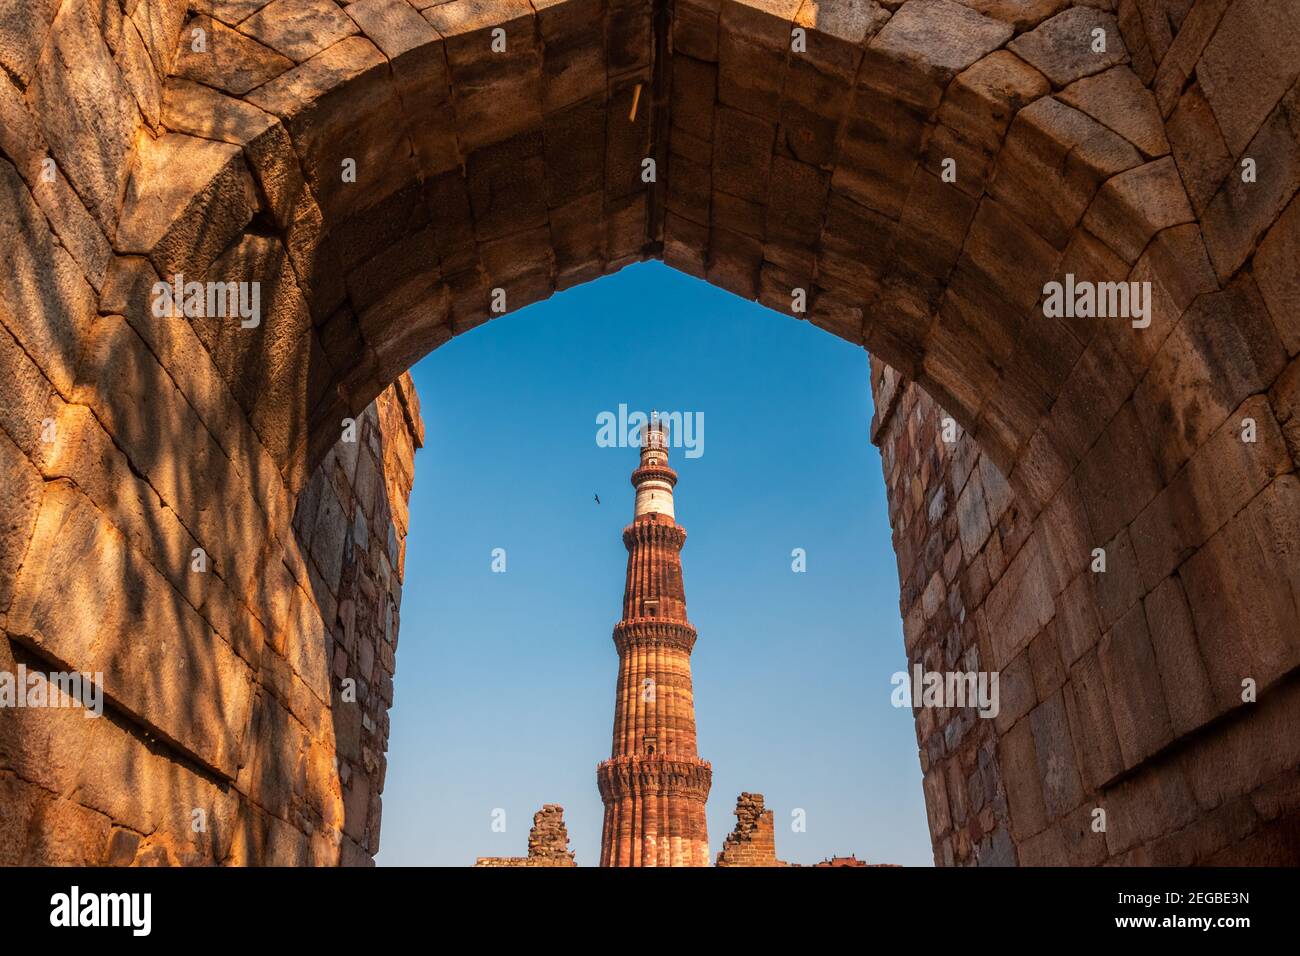 Qutub Minar (Minaret) a highest minaret in India standing 73 M tall tapering tower of five story made of red sandstone. Stock Photo